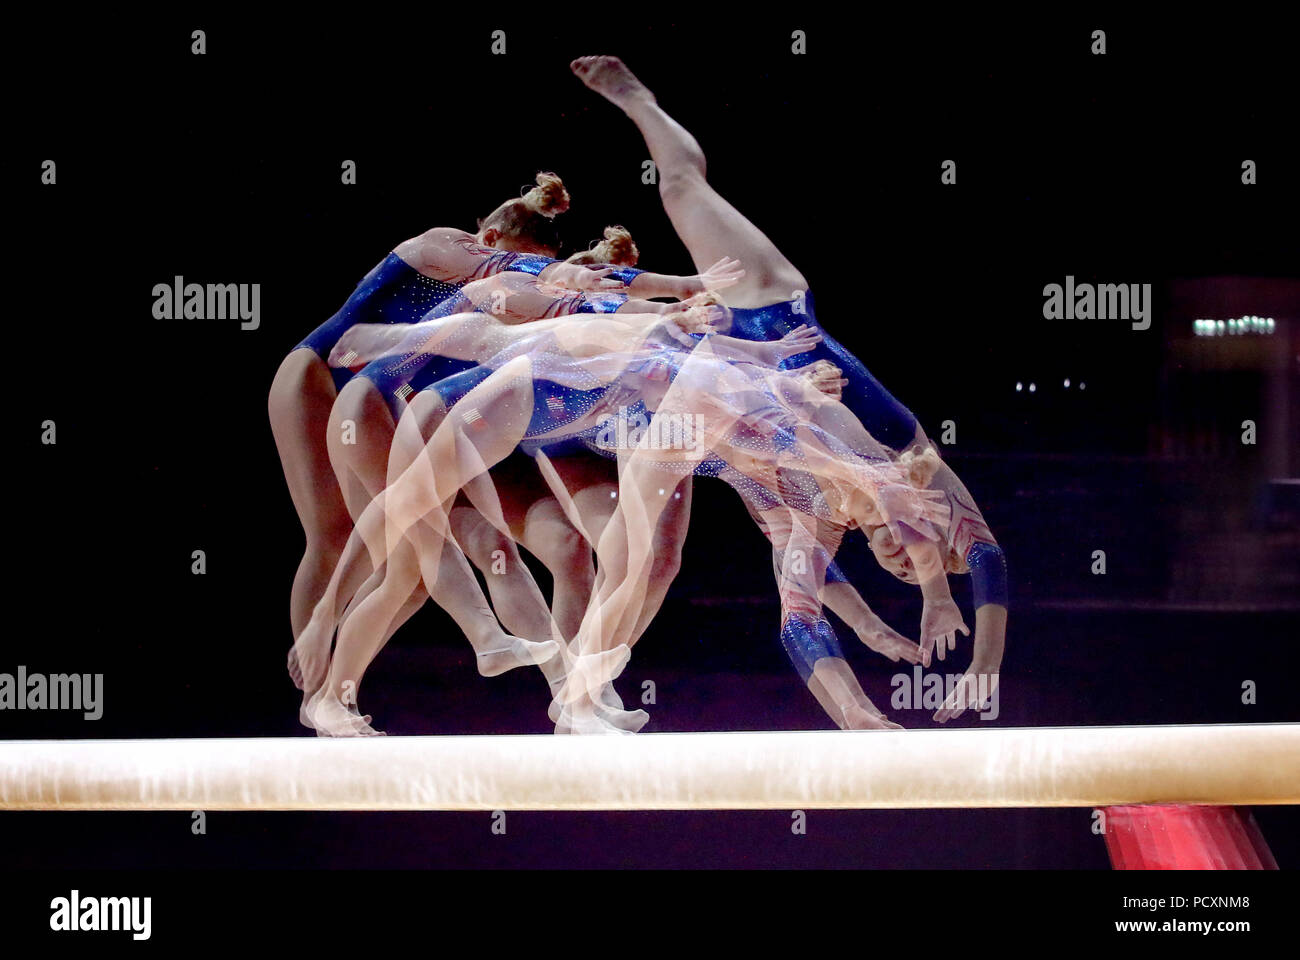 France's Lorette Charpy on the balance beam during day three of the 2018 European Championships at The SSE Hydro, Glasgow. ***IN-CAMERA MULTIPLE EXPOSURE*** Stock Photo